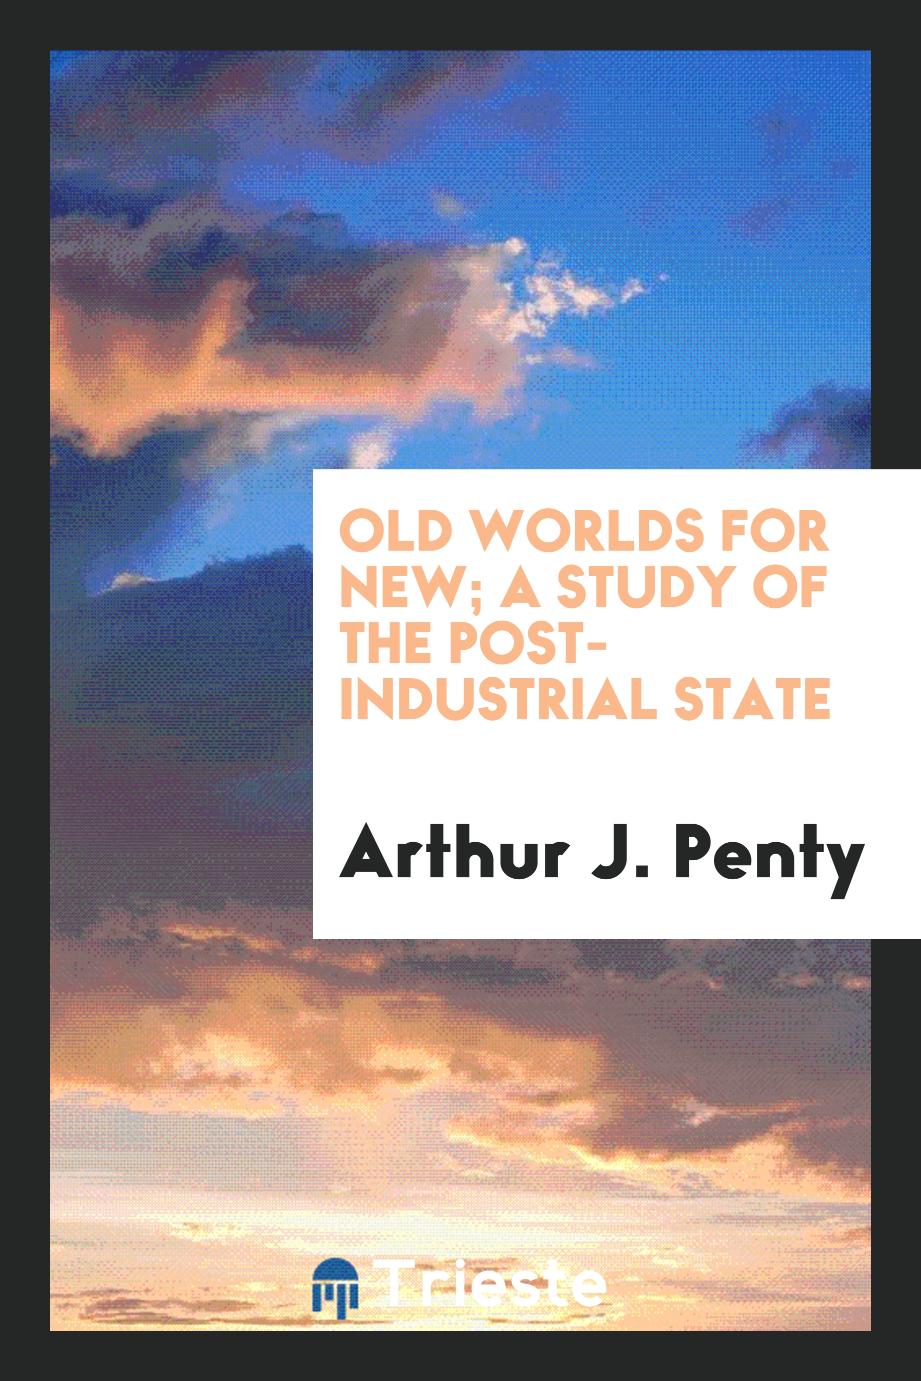 Old worlds for new; a study of the post-industrial state